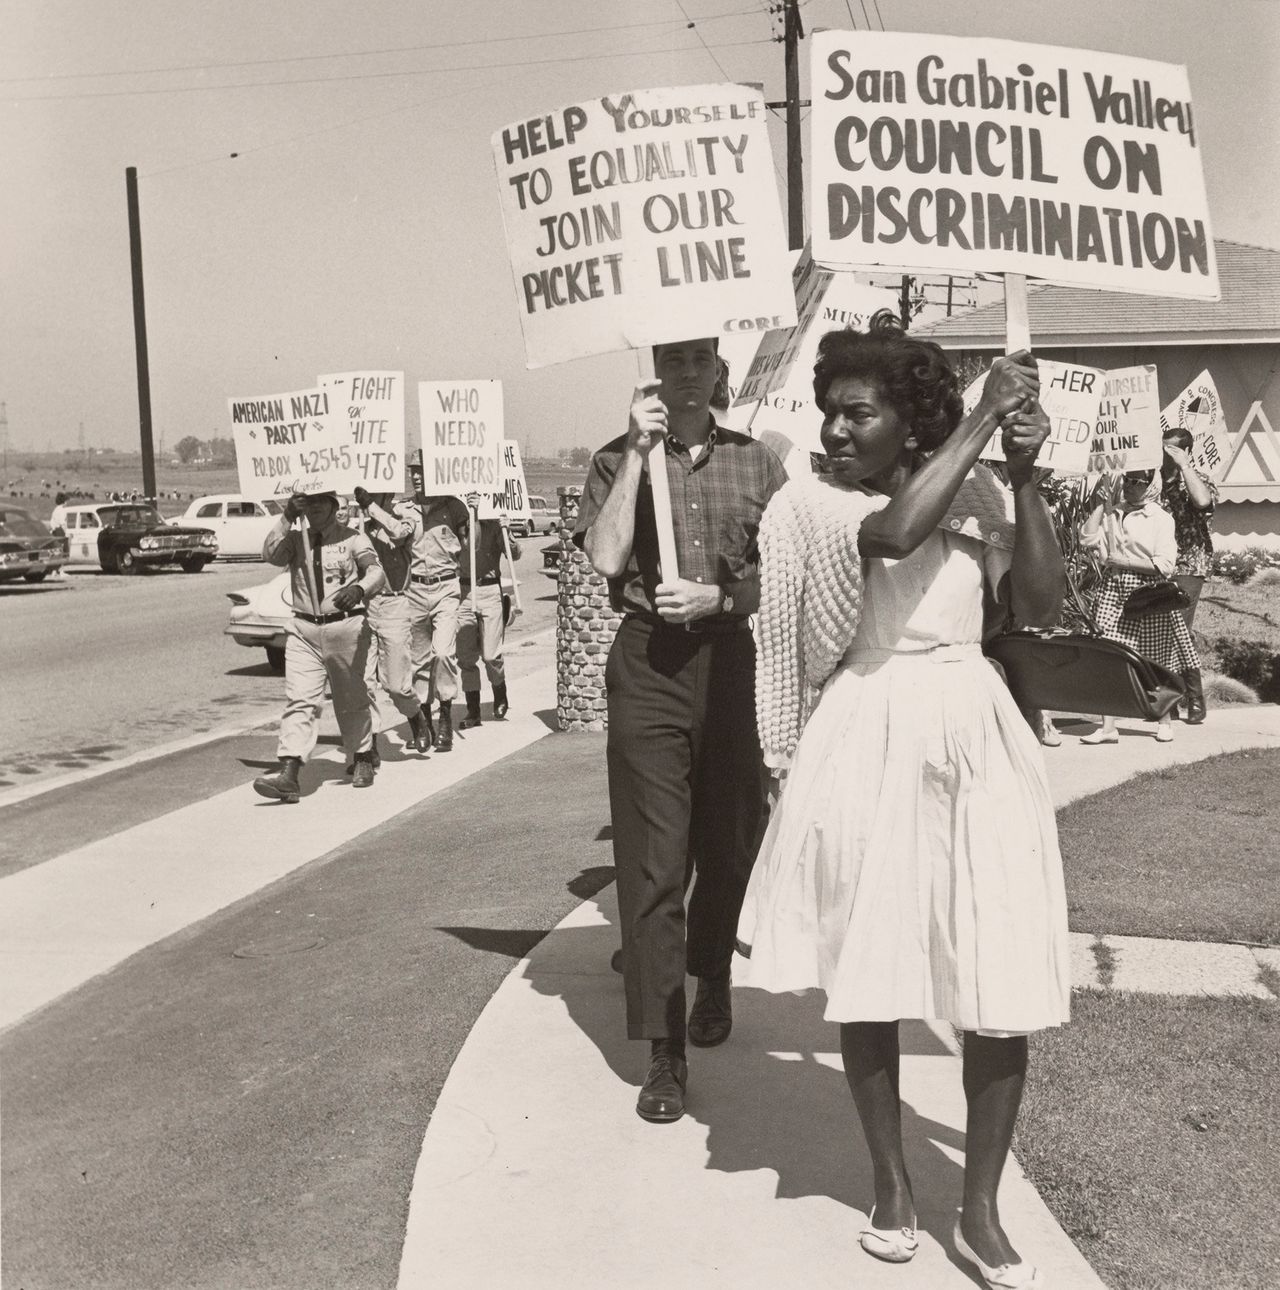 A photo of civil rights advocates picketing next to the American Nazi Party put our country's current politics into sharp relief.